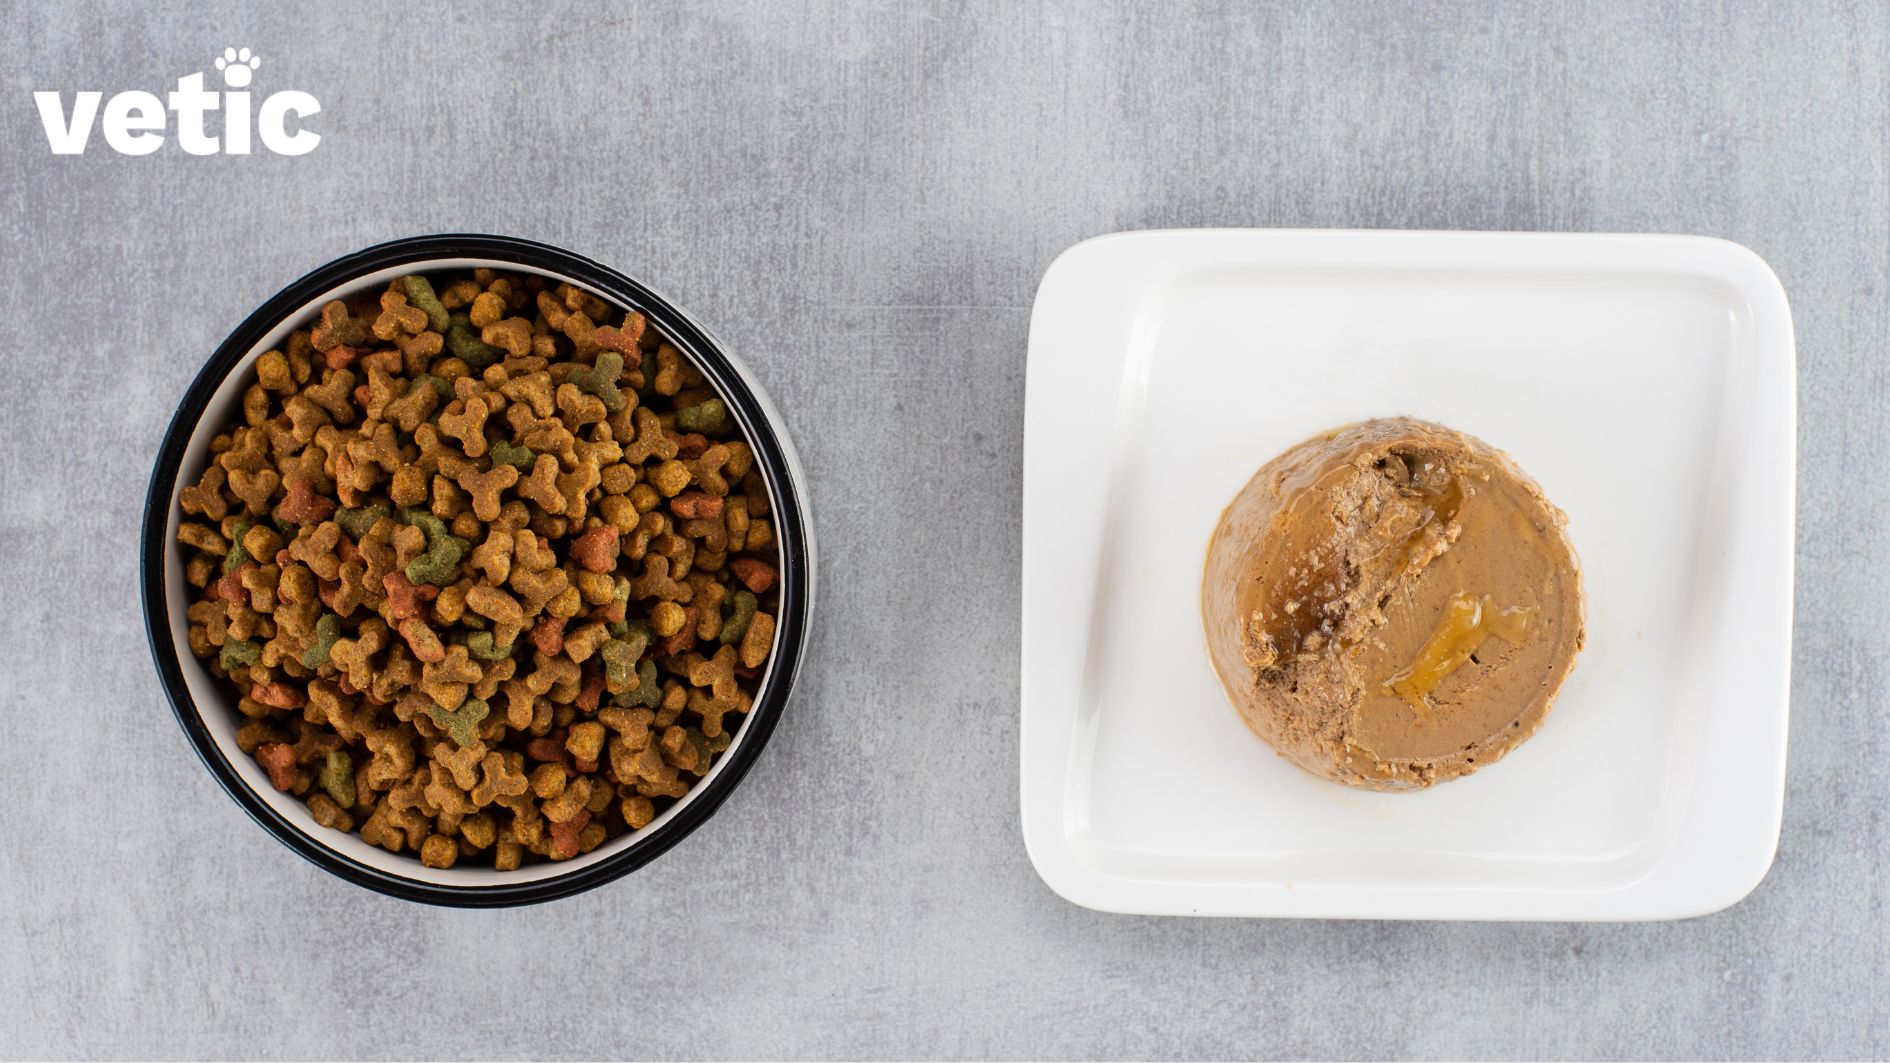 Photo of cat food. Dry cat food in a ceramic food bowl is on the left. Wet canned food is on the right in a plate. the containers are kept against a grey background.